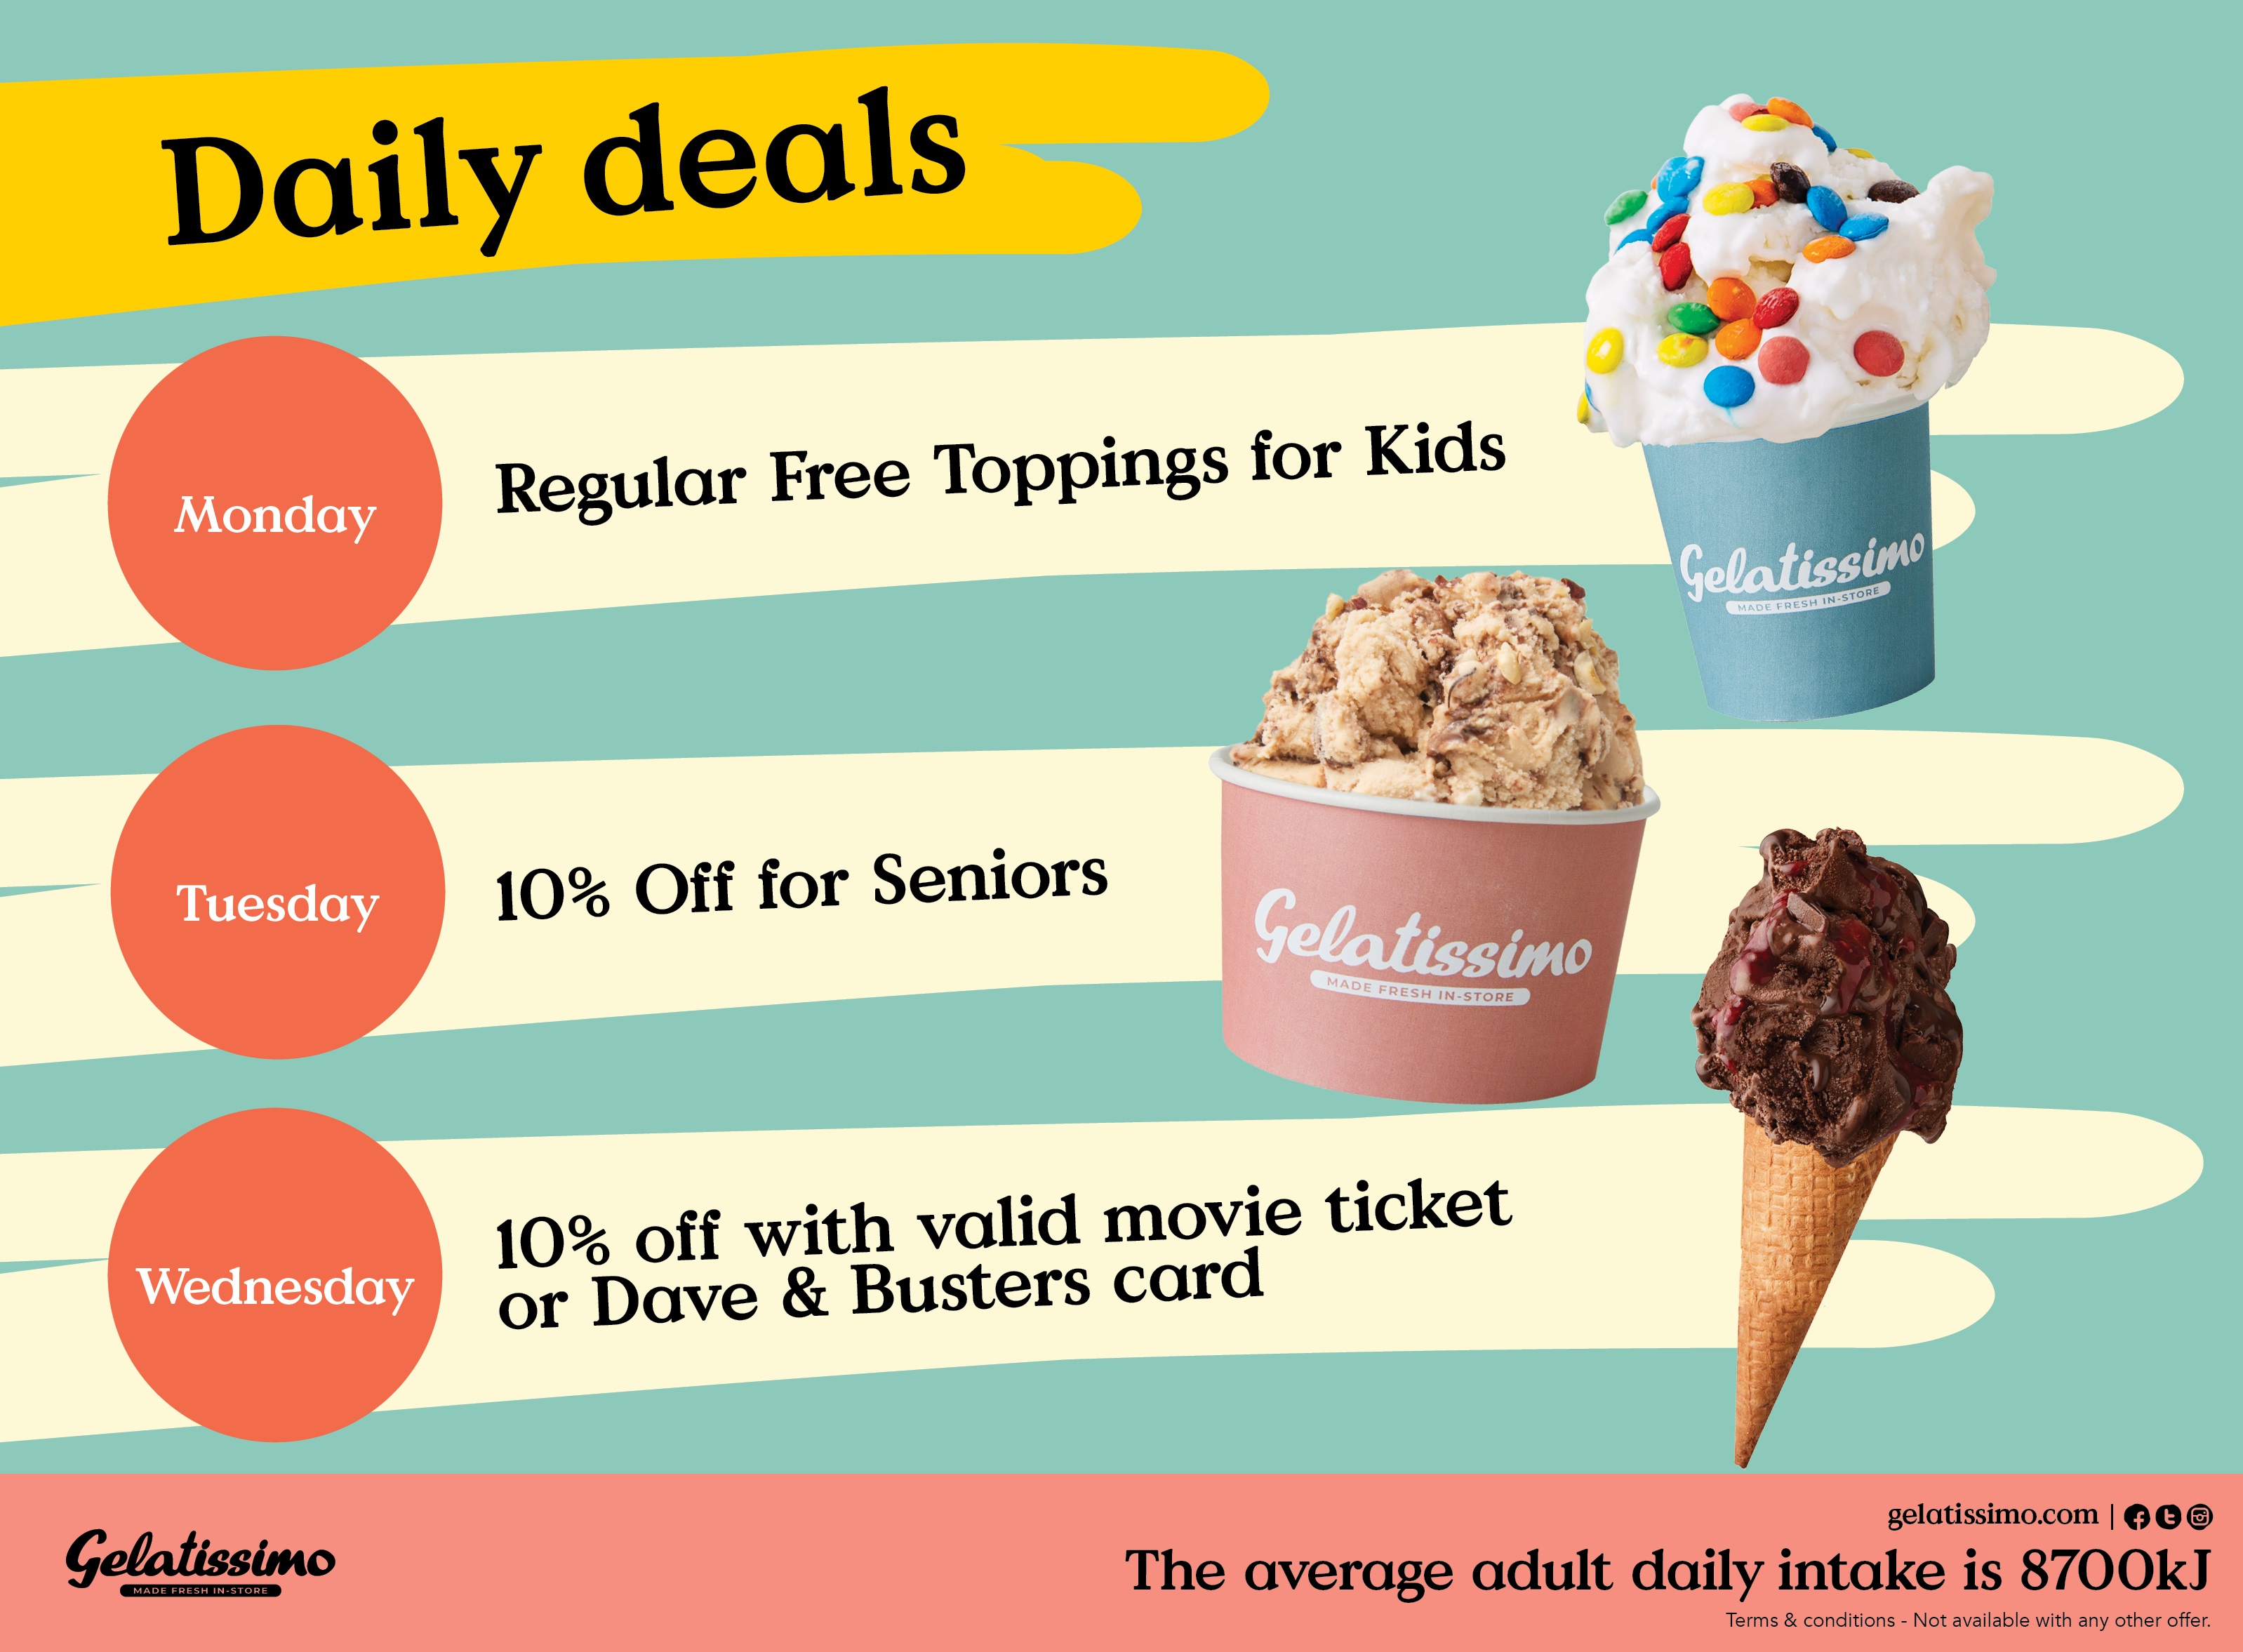 Join us for weekly deals from Gelatissimo